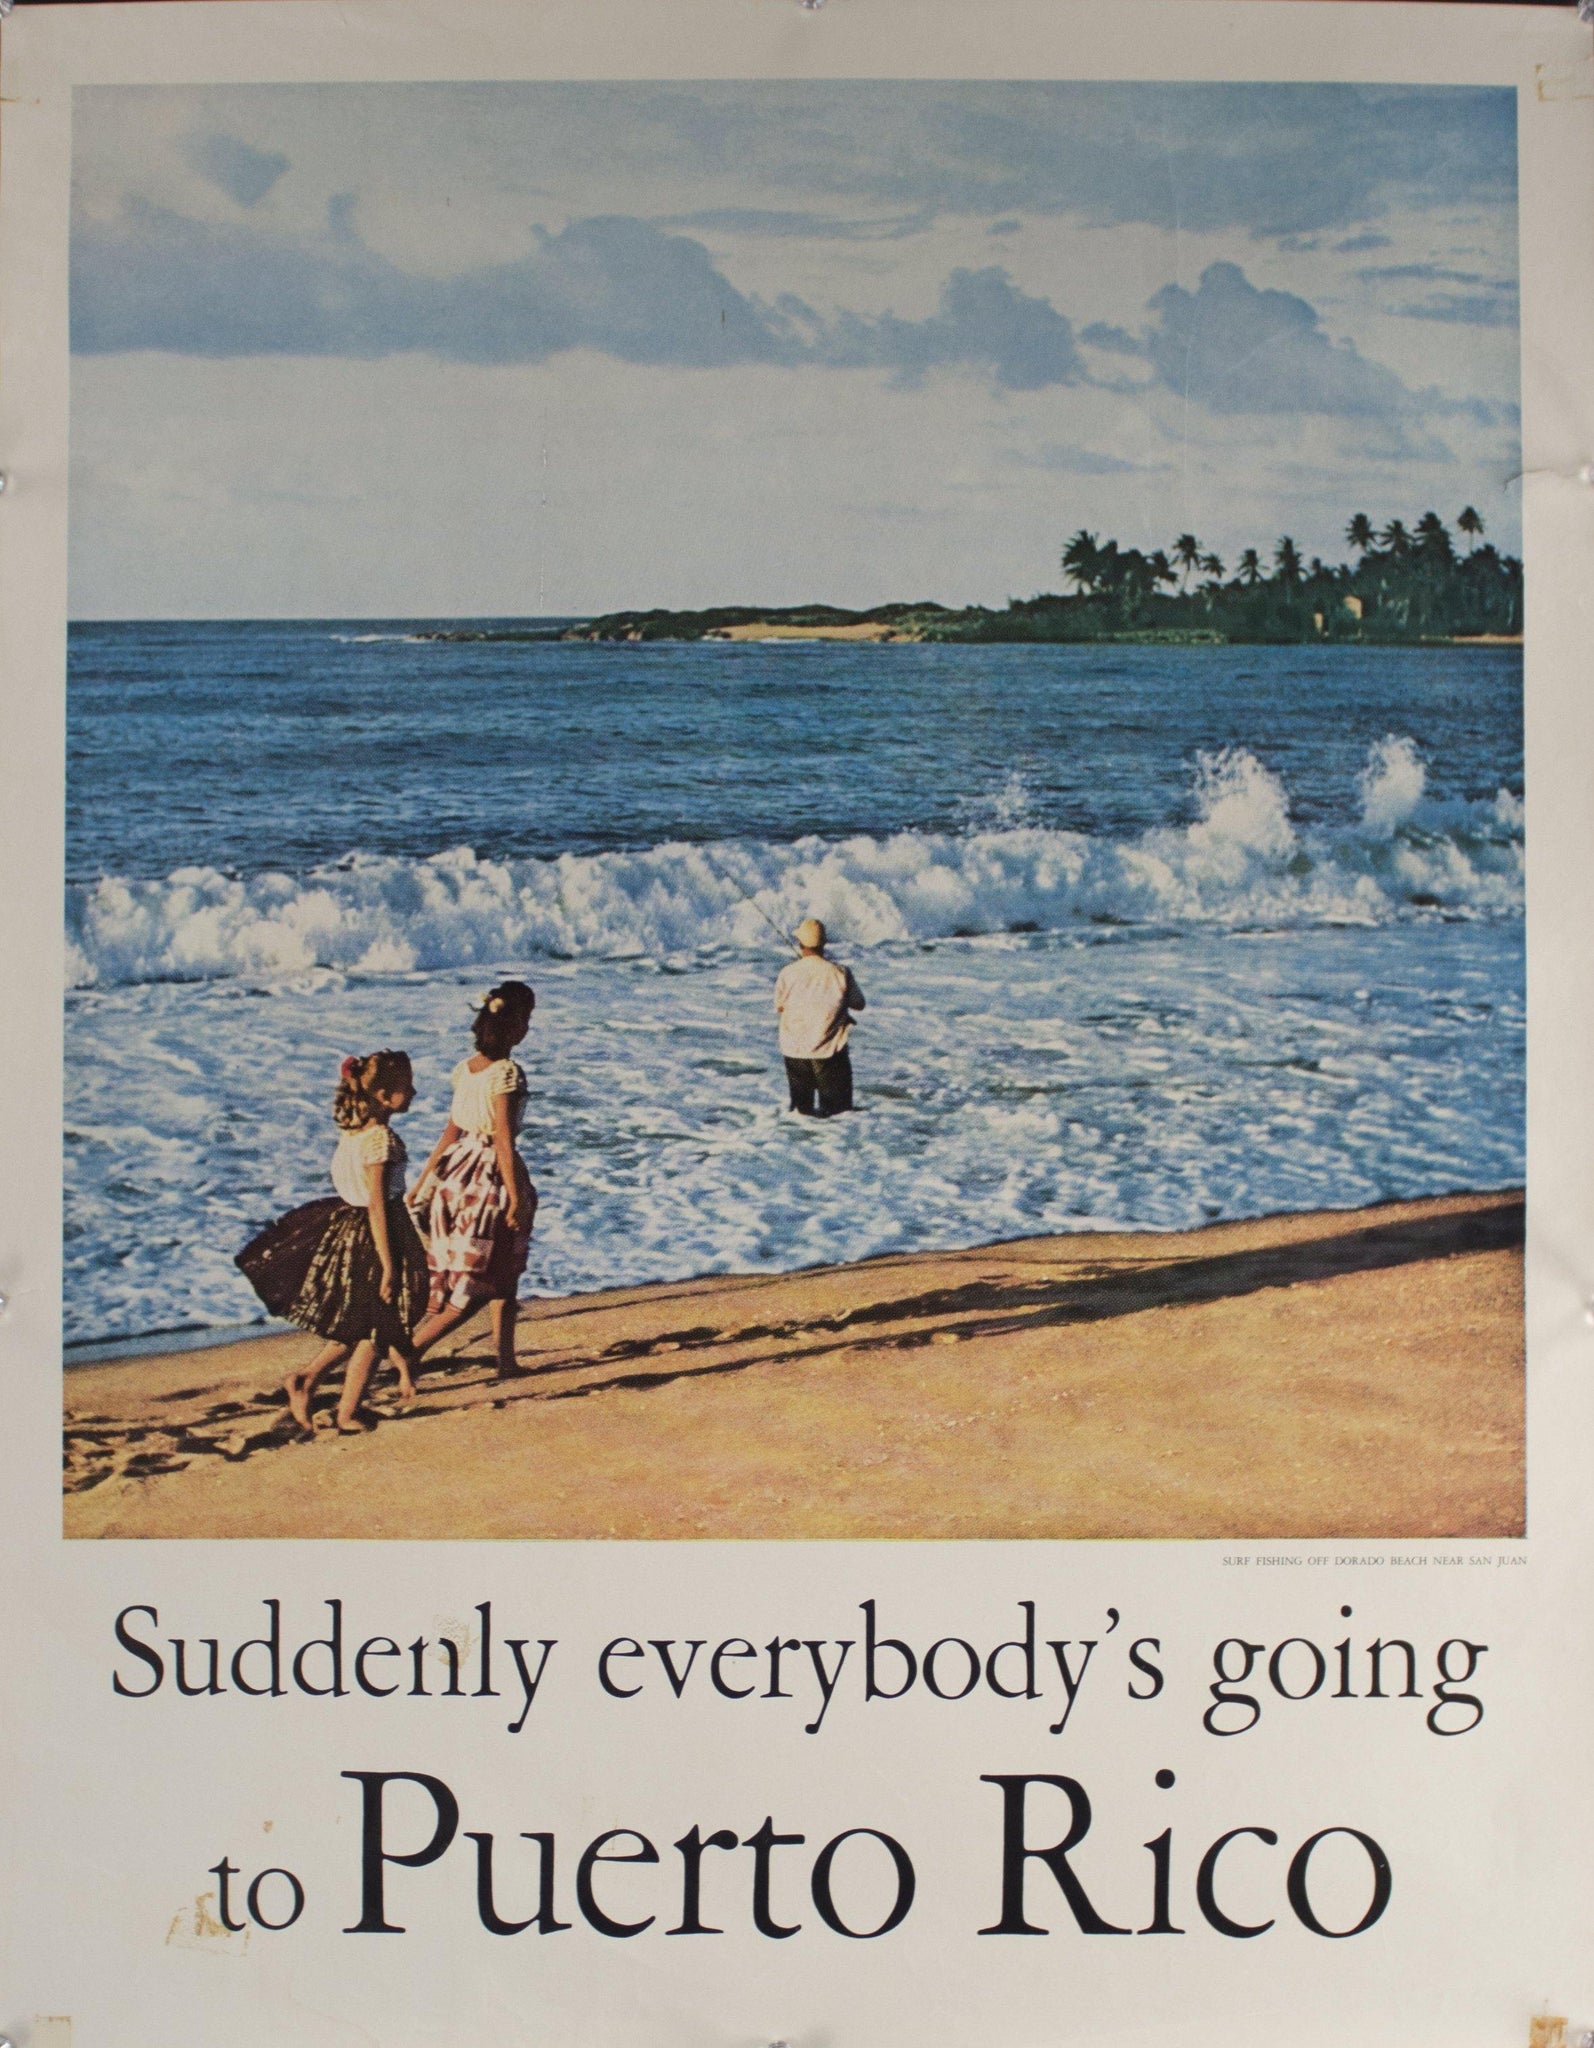 c. 1959 Suddenly everybody's going to Puerto Rico | Surf Fishing Off Dorado Beach - Golden Age Posters